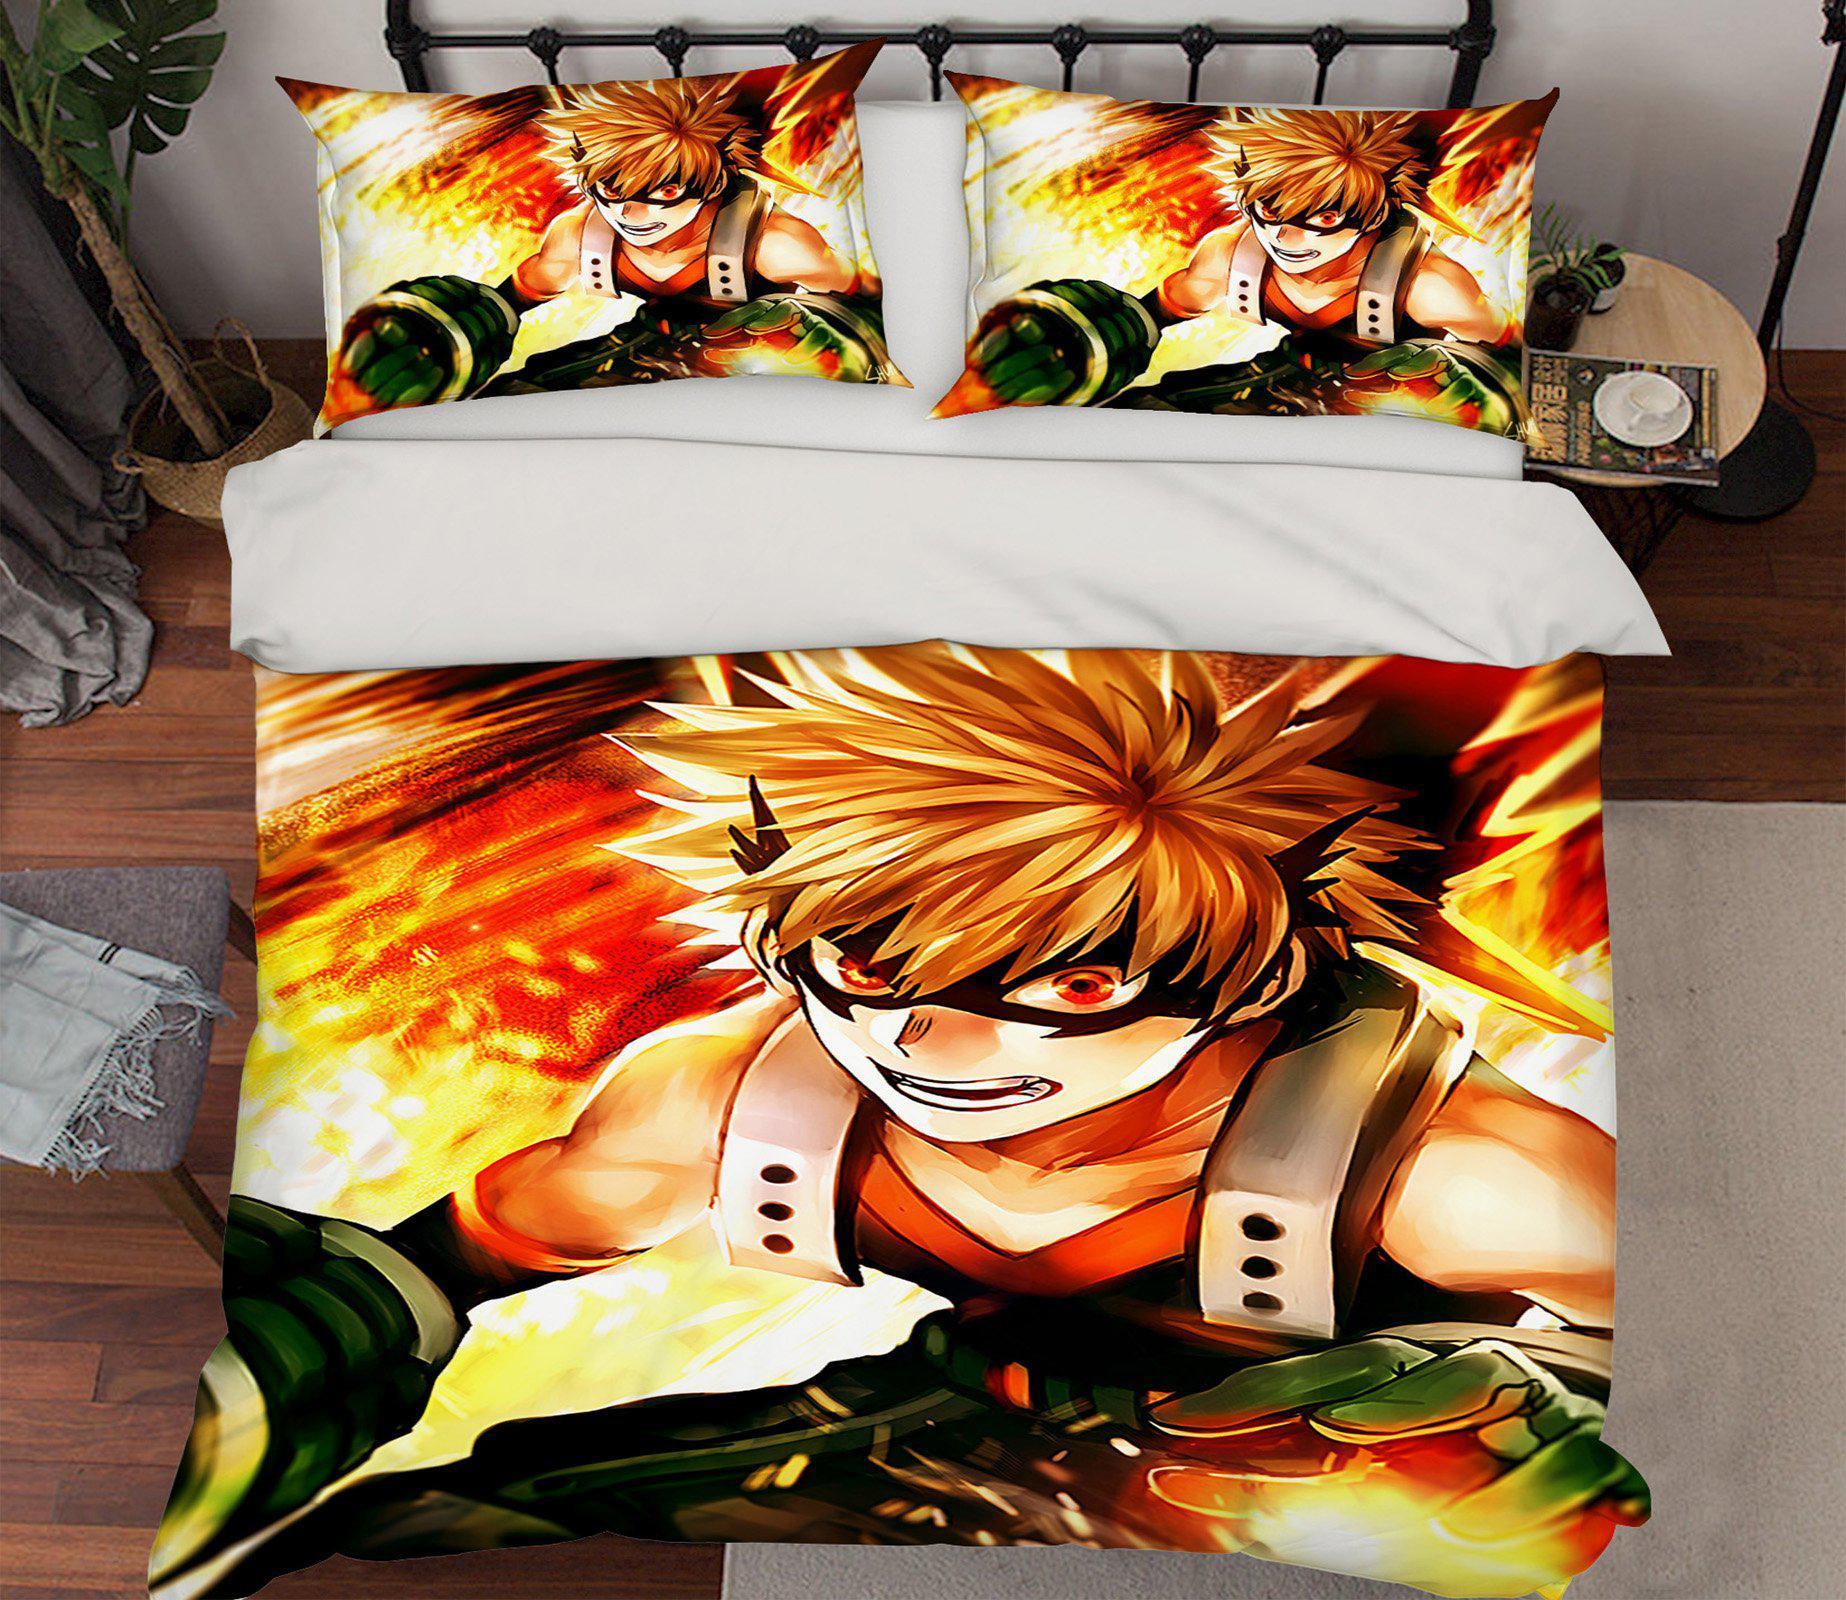 3D Bed Pillowcases Quilt My Hero Academia 21088 Anime Quilt Cover Set Bedding Set Pillowcases 3D Bed Pillowcases Quilt Duvet cover